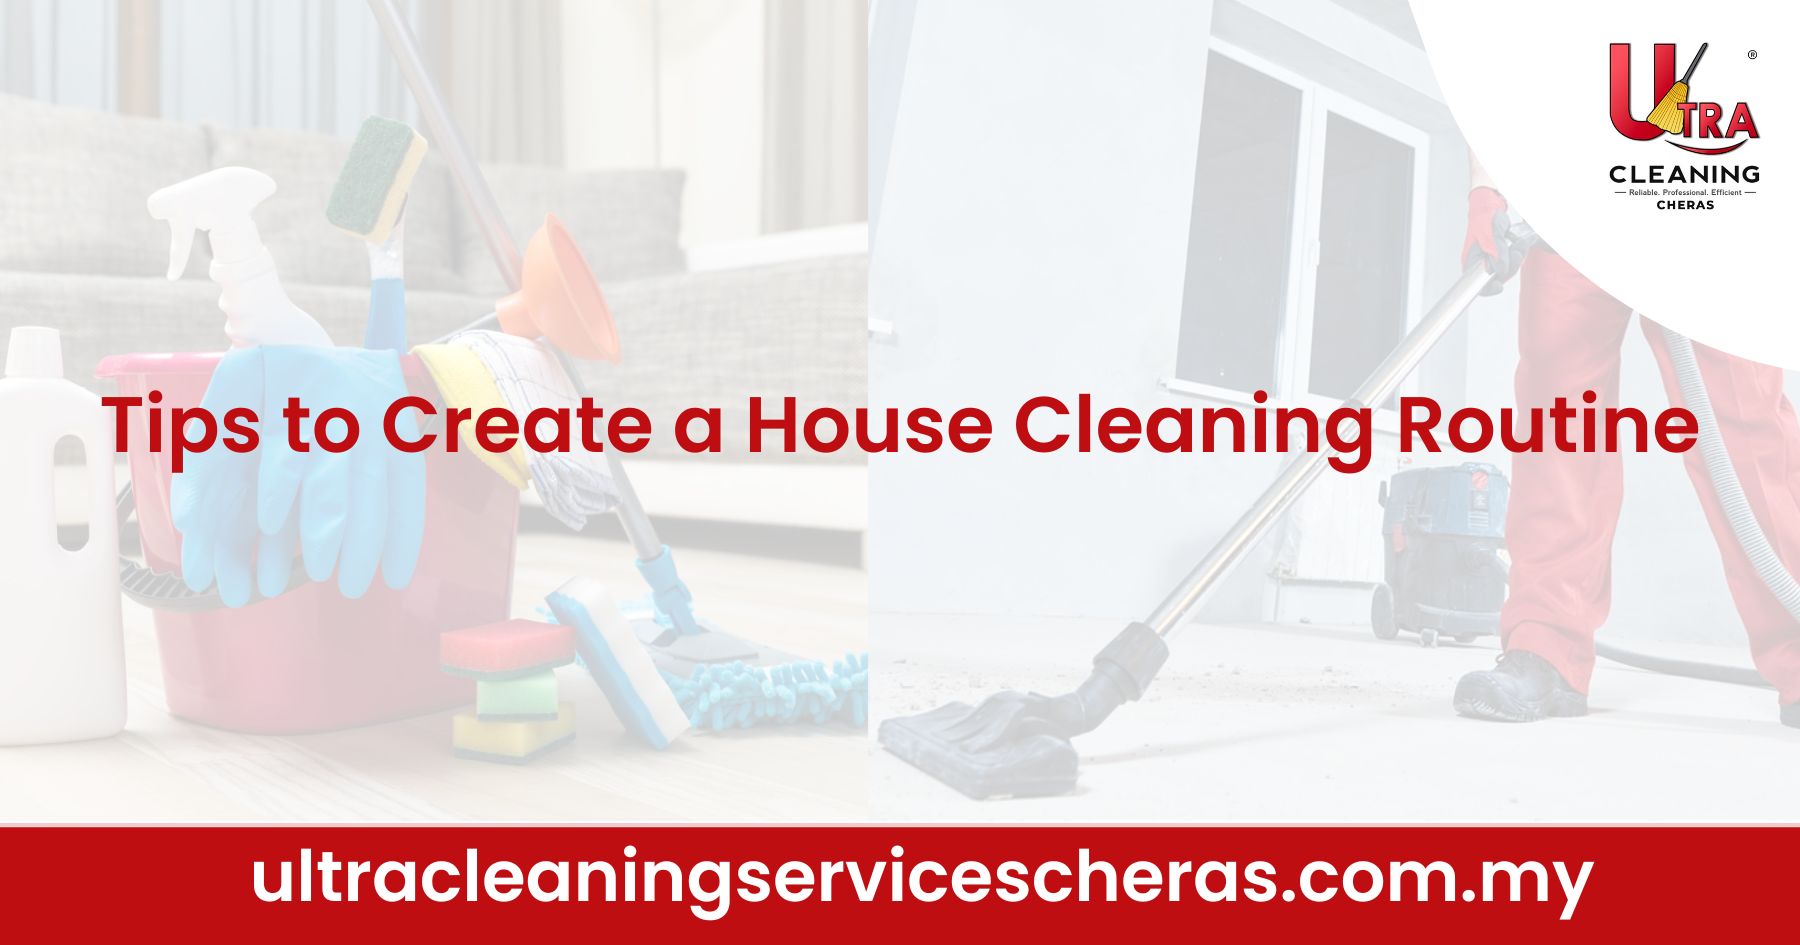 Tips to Create a House Cleaning Routine